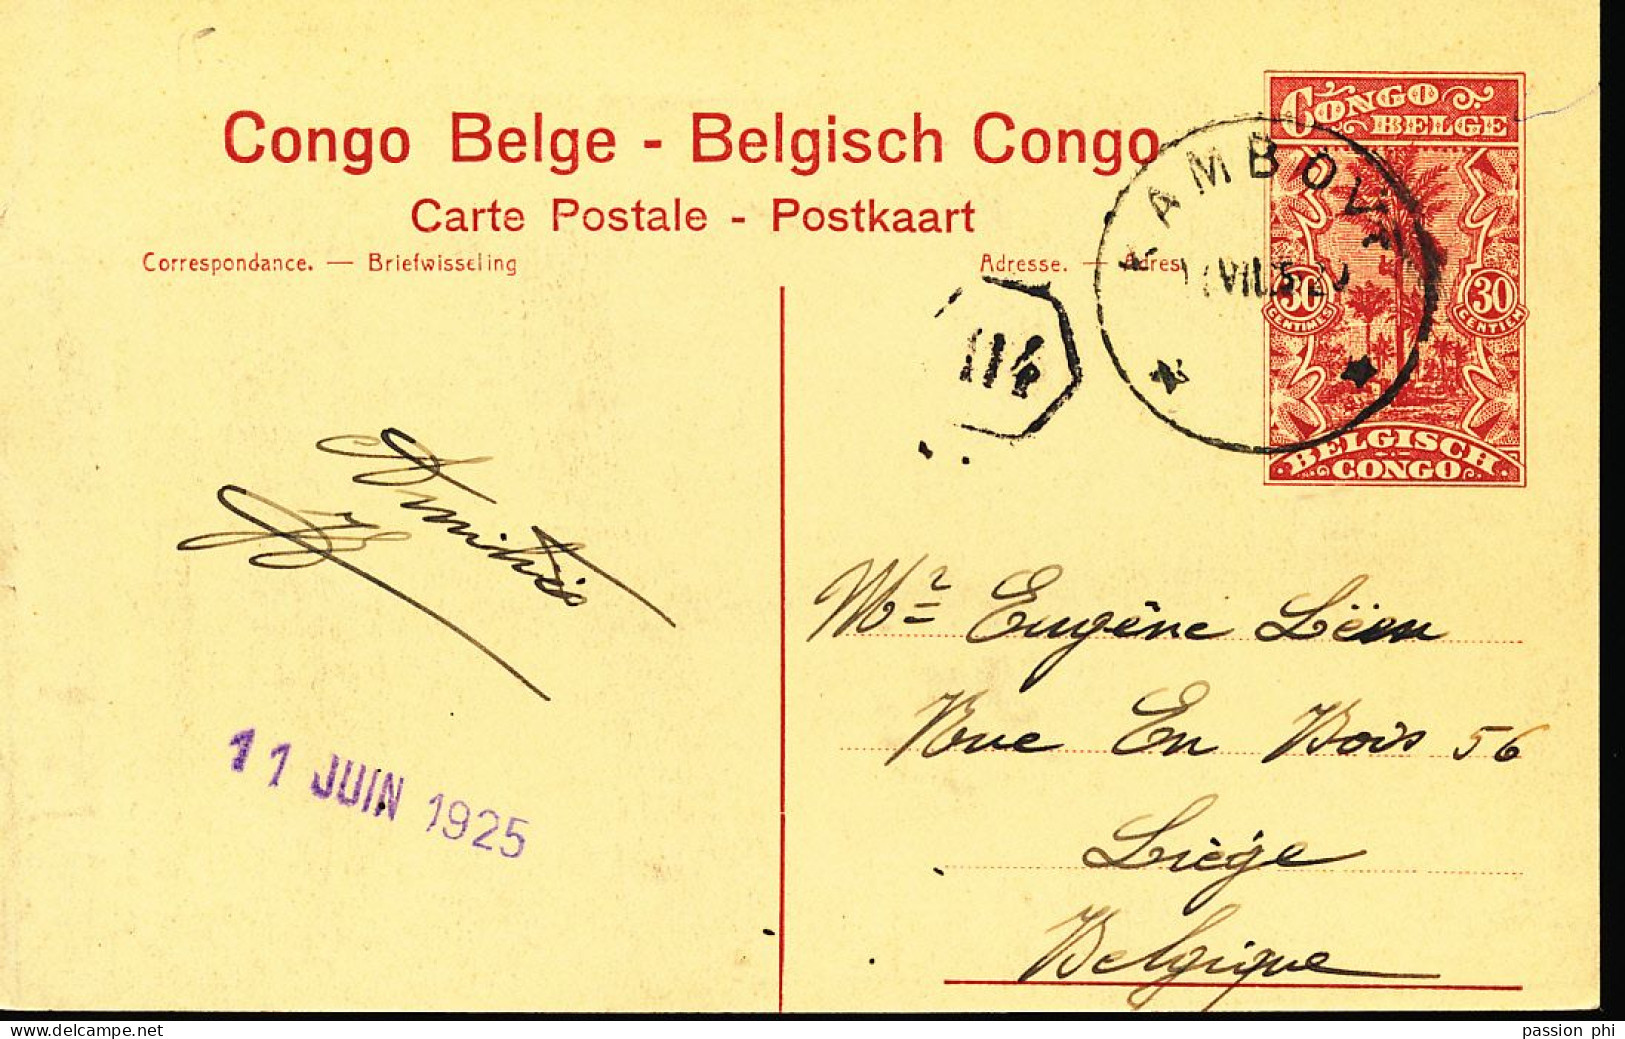 BELGIAN CONGO 1922 ISSUE PPS SBEP 62 VIEW 111 USED - Enteros Postales